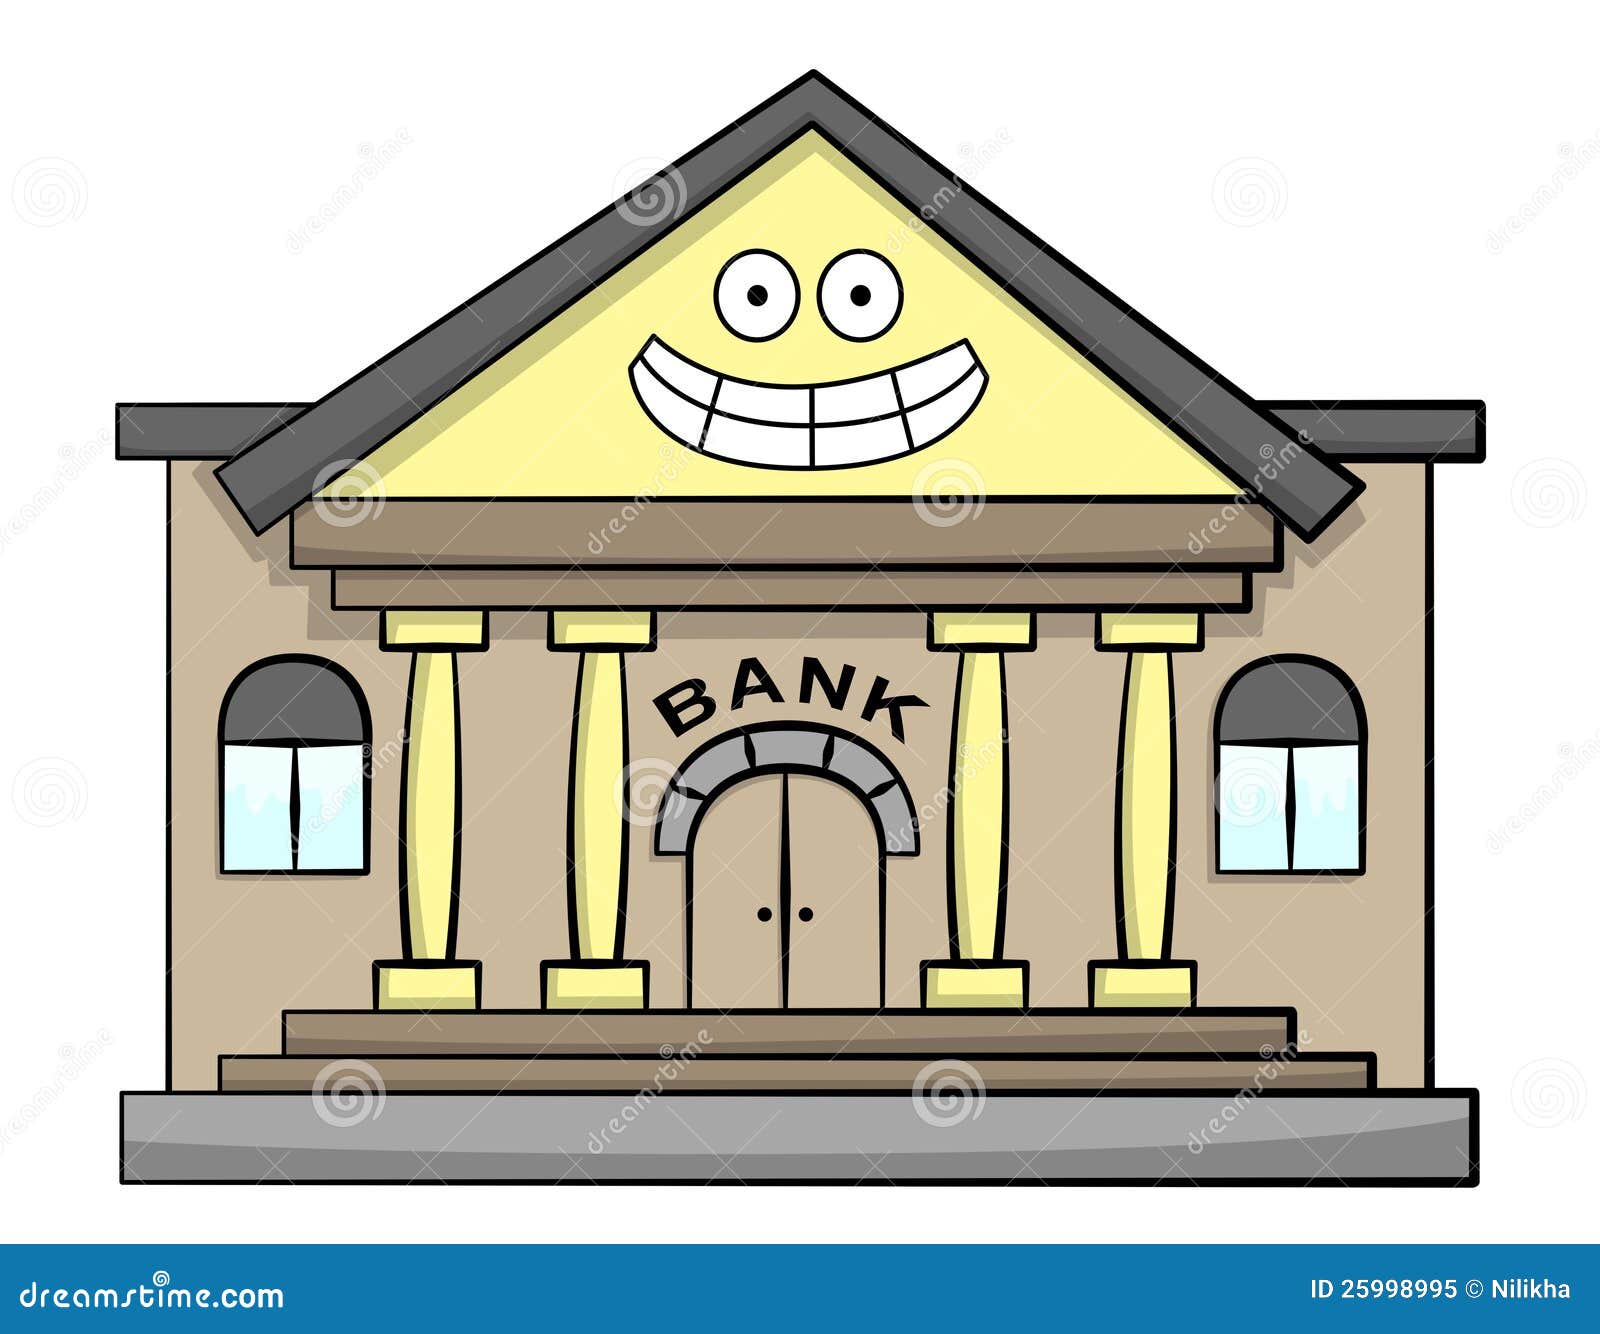 clipart of bank - photo #11